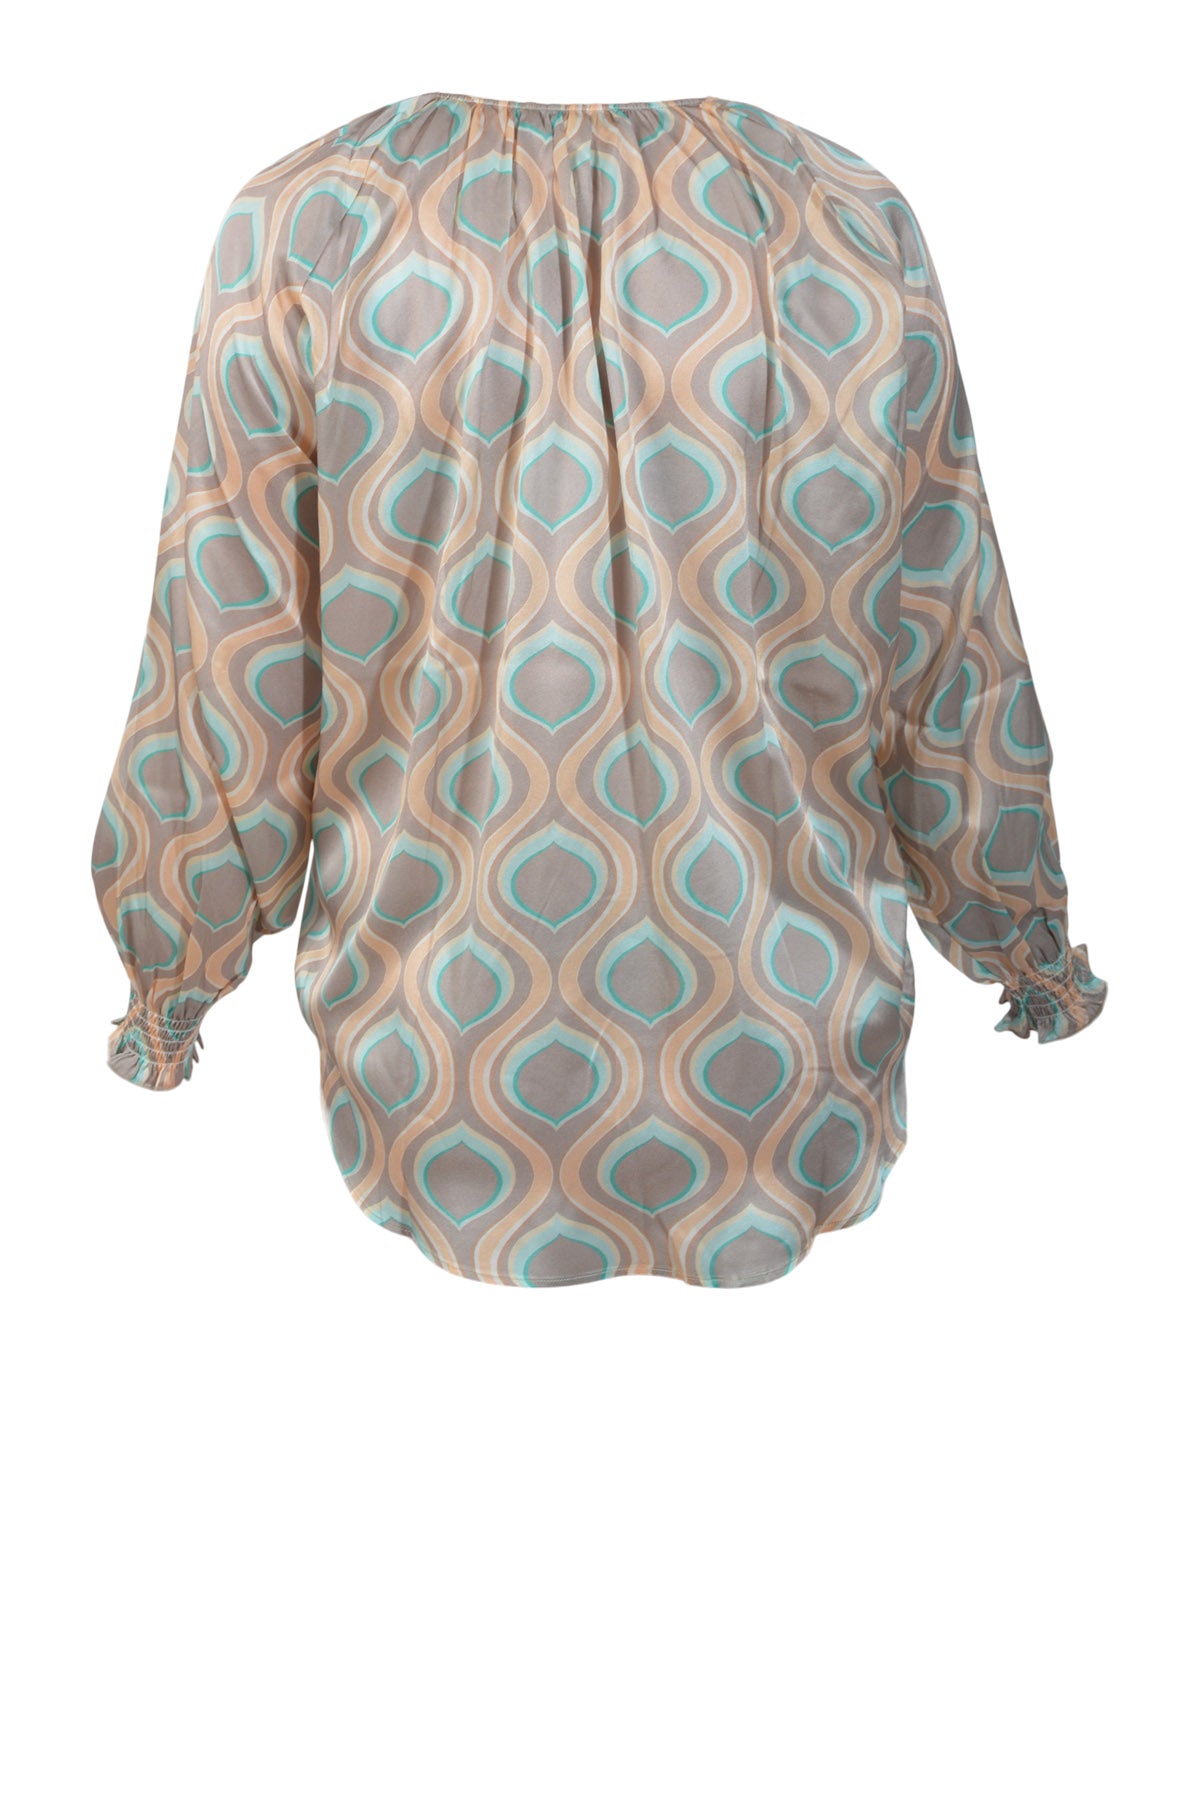 Charlotte Sparre Jammy Blouse 2907, Ollie Taupe/Blue